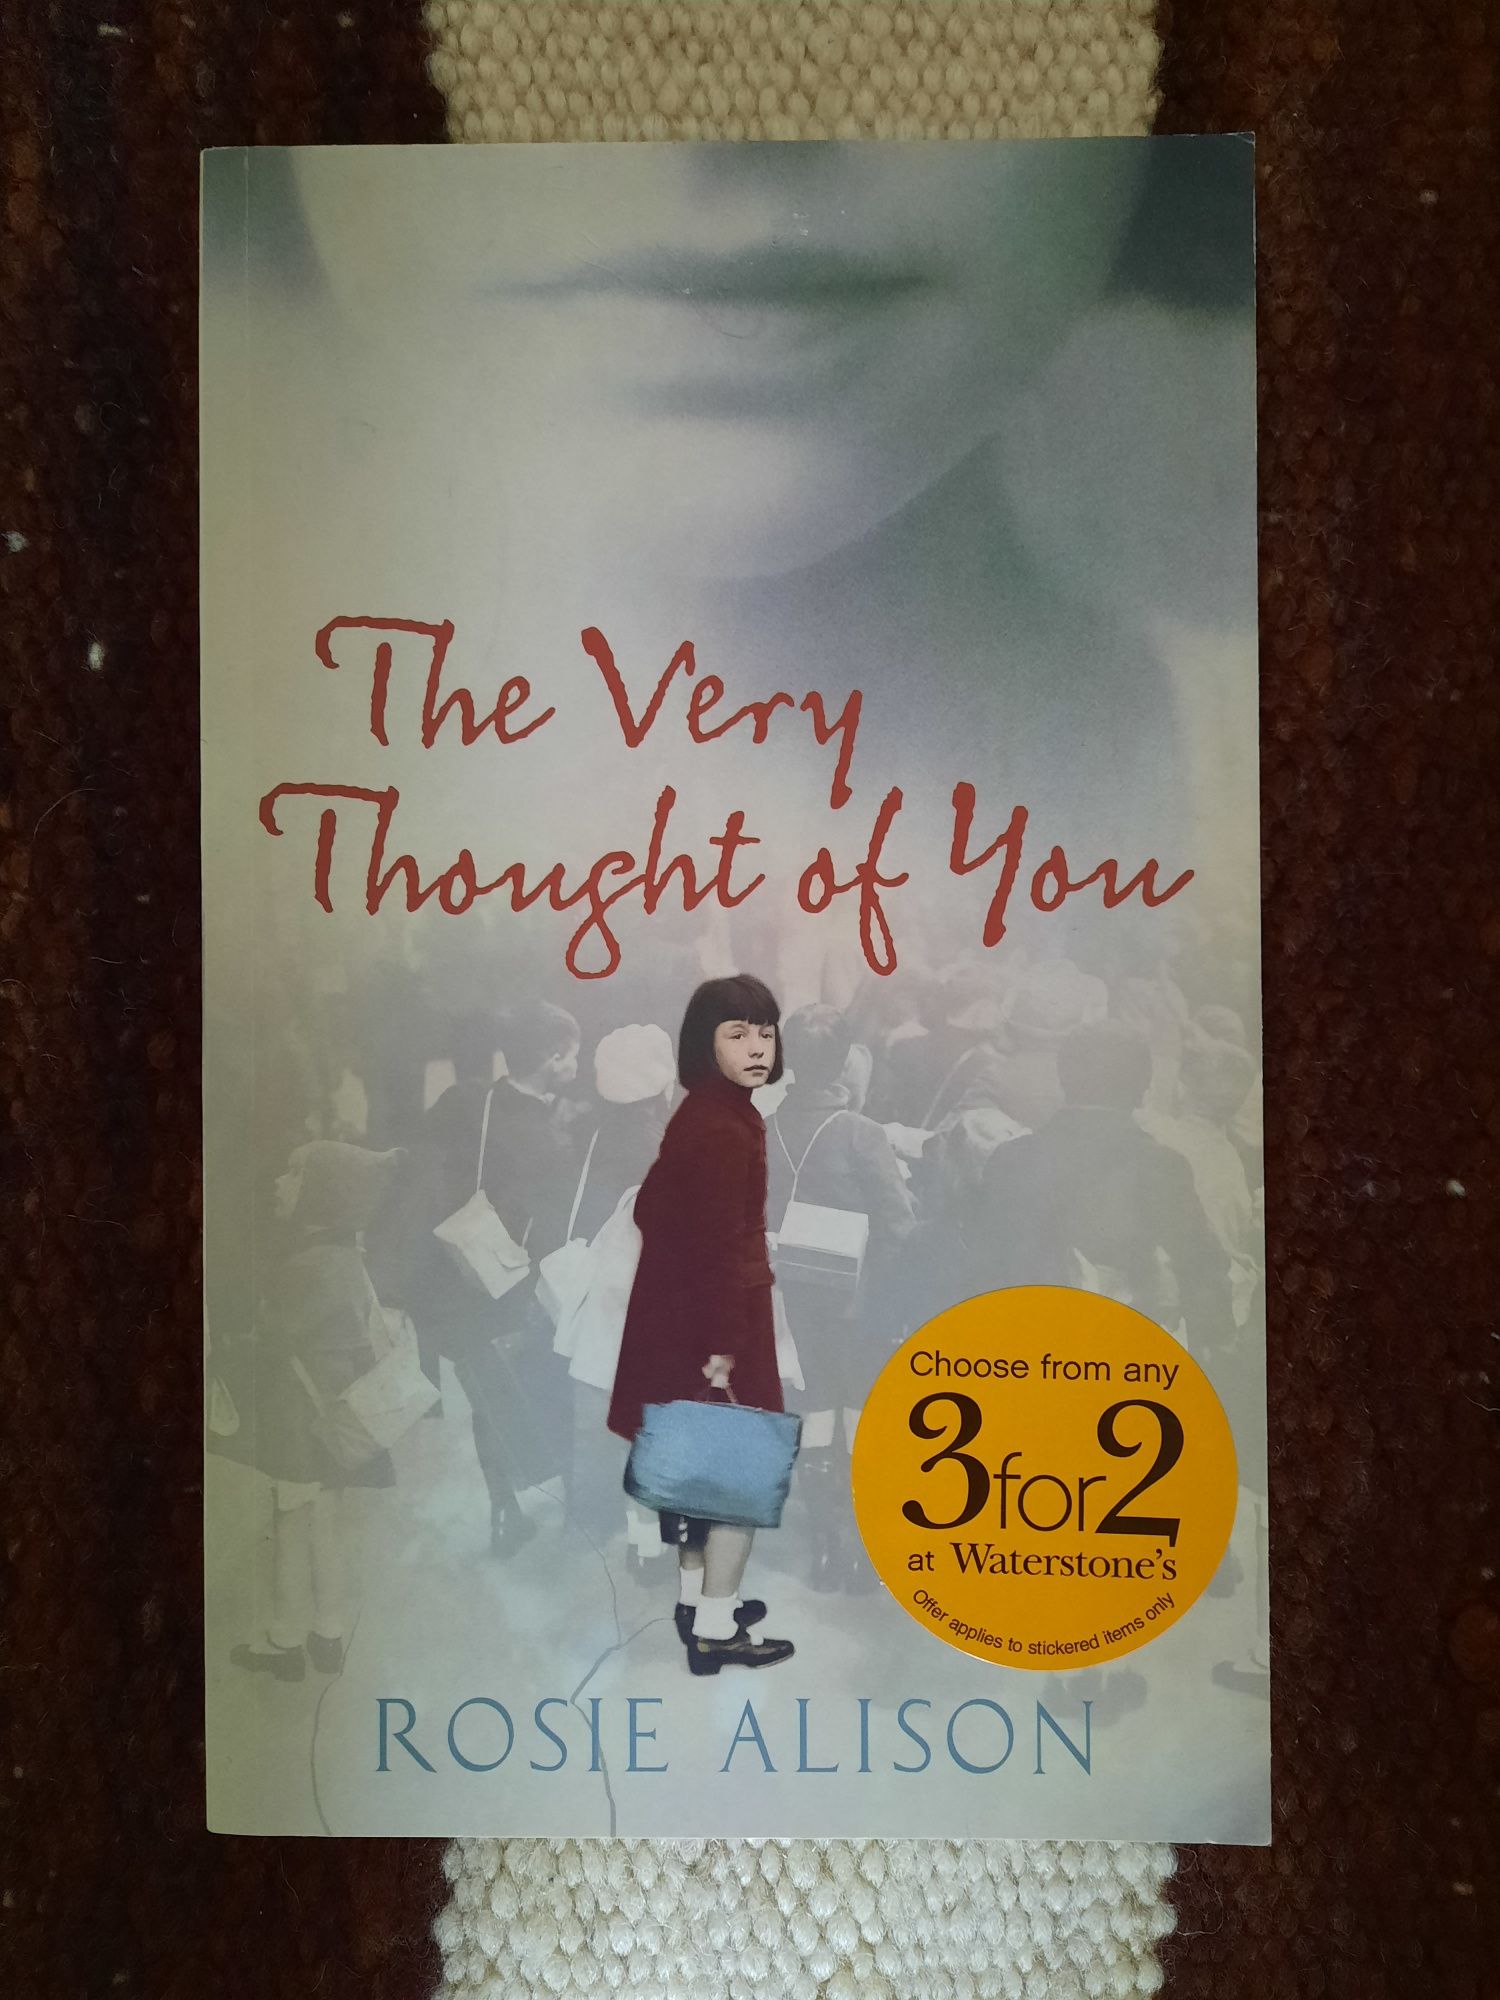 Livro "The Very Thought of You", de Rosie Alison